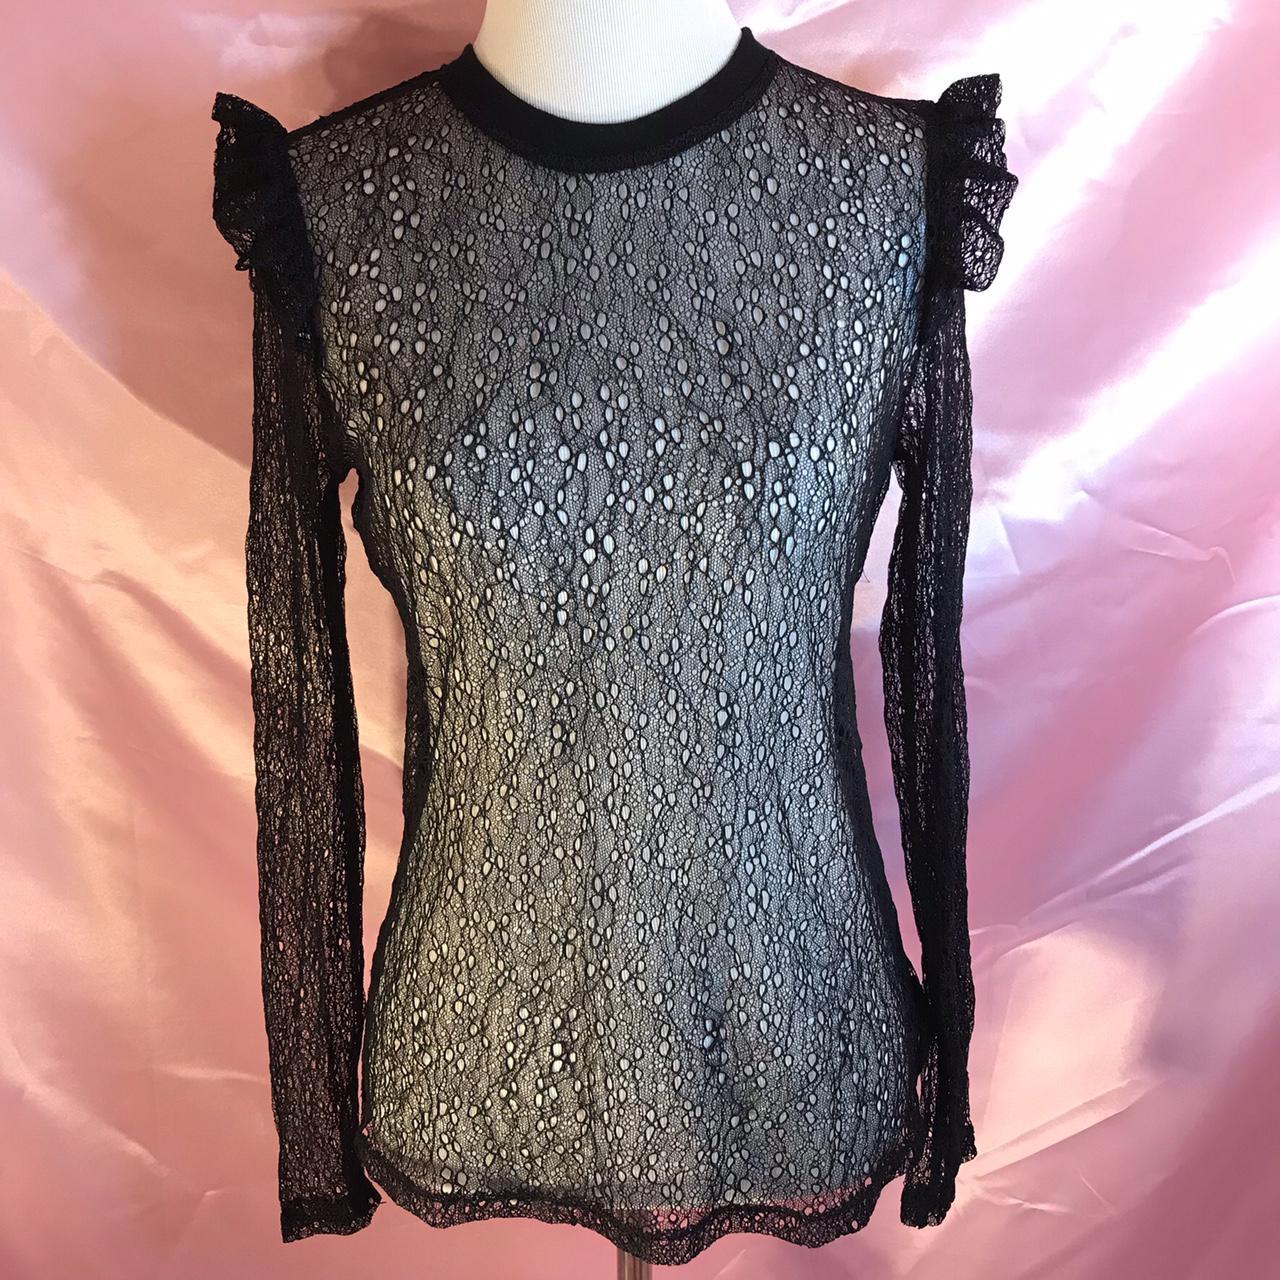 Product Image 1 - Who what wear black lace